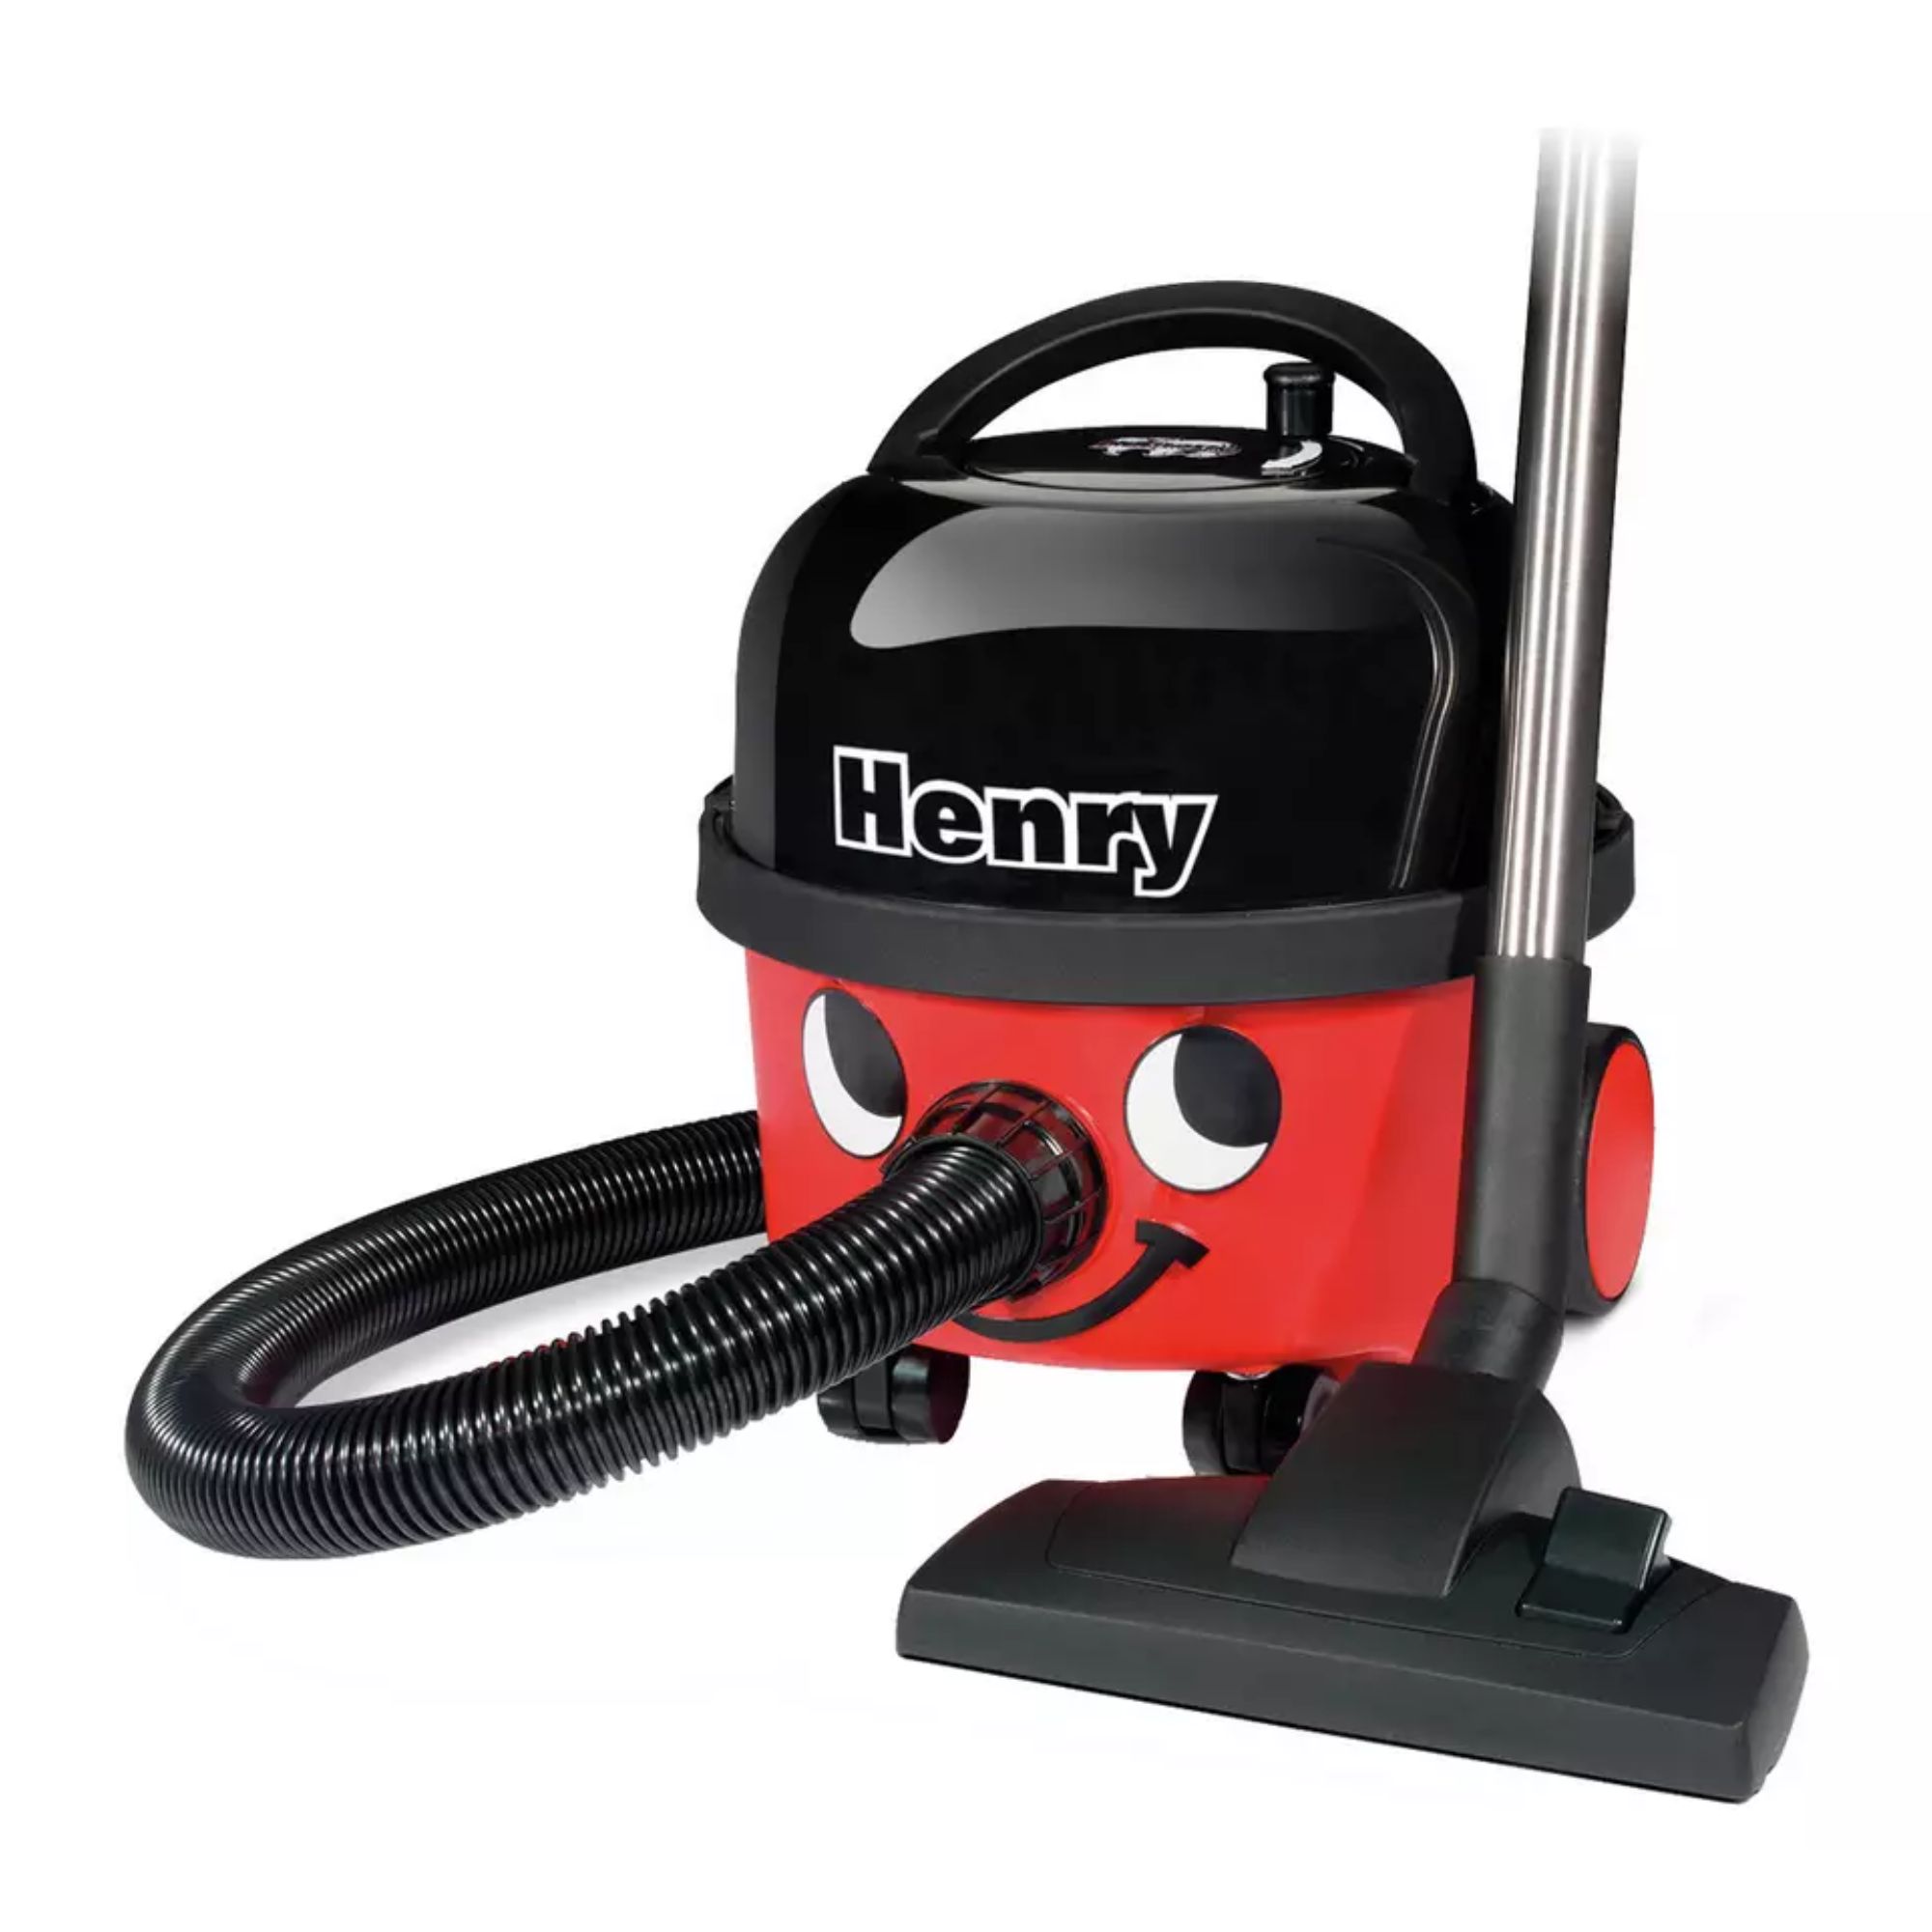 Henry bagged corded cylinder vacuum cleaner